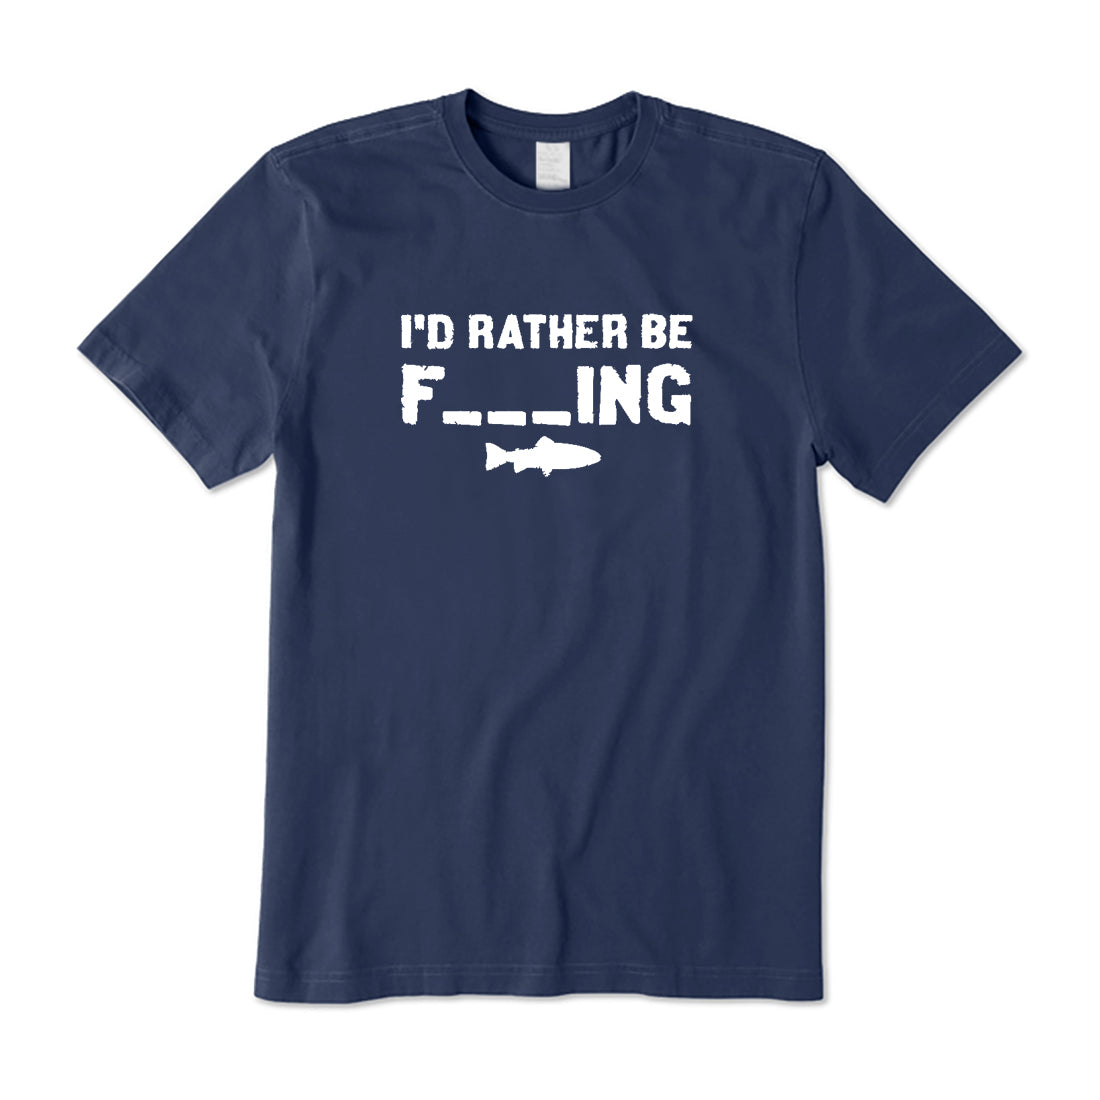 I'd Rather Be F_ING T-Shirt